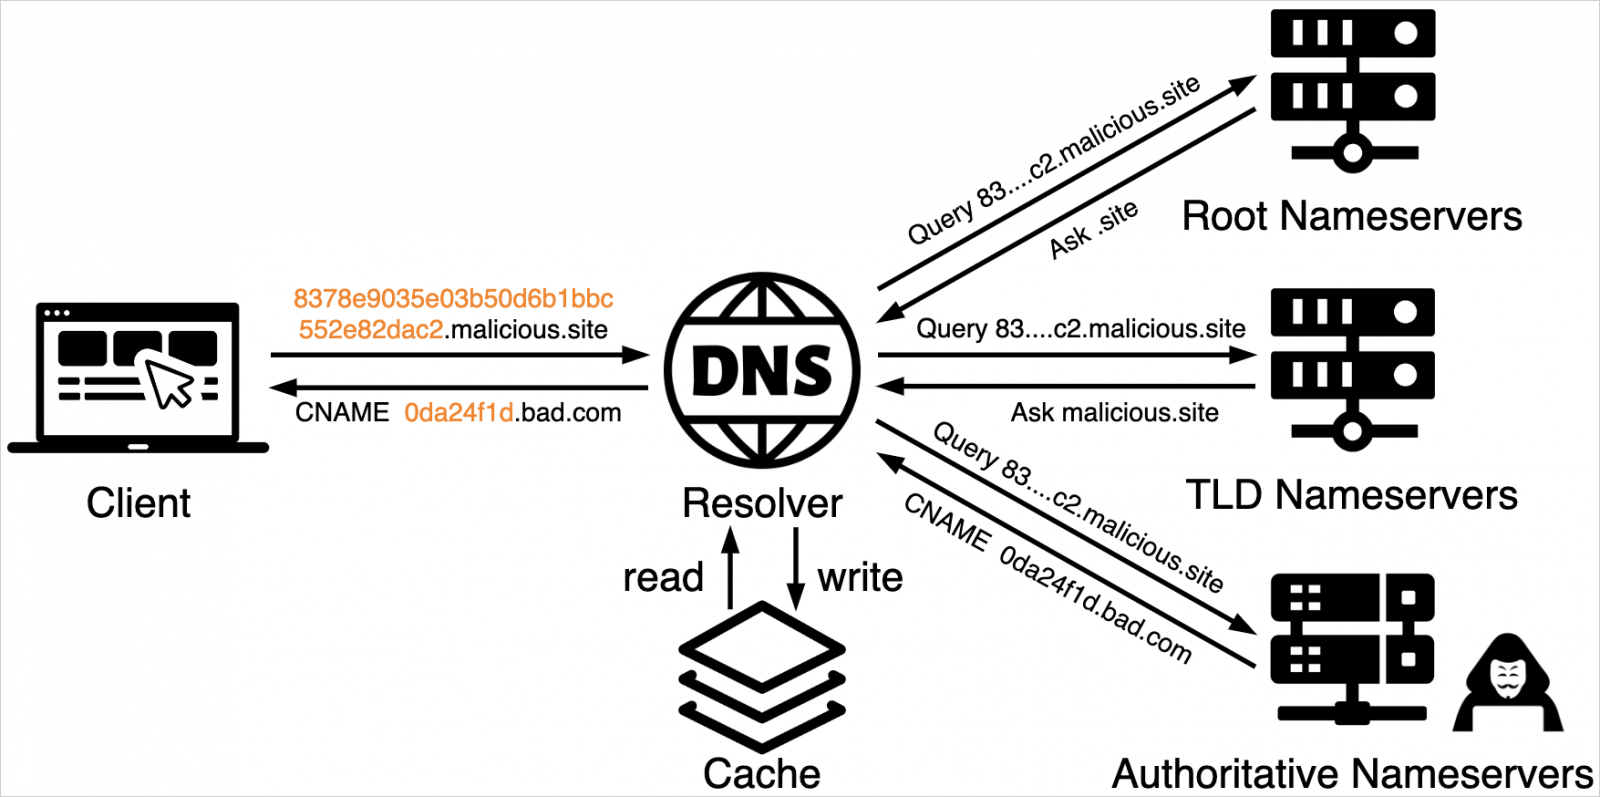 Data exfiltration and injection via DNS tunneling